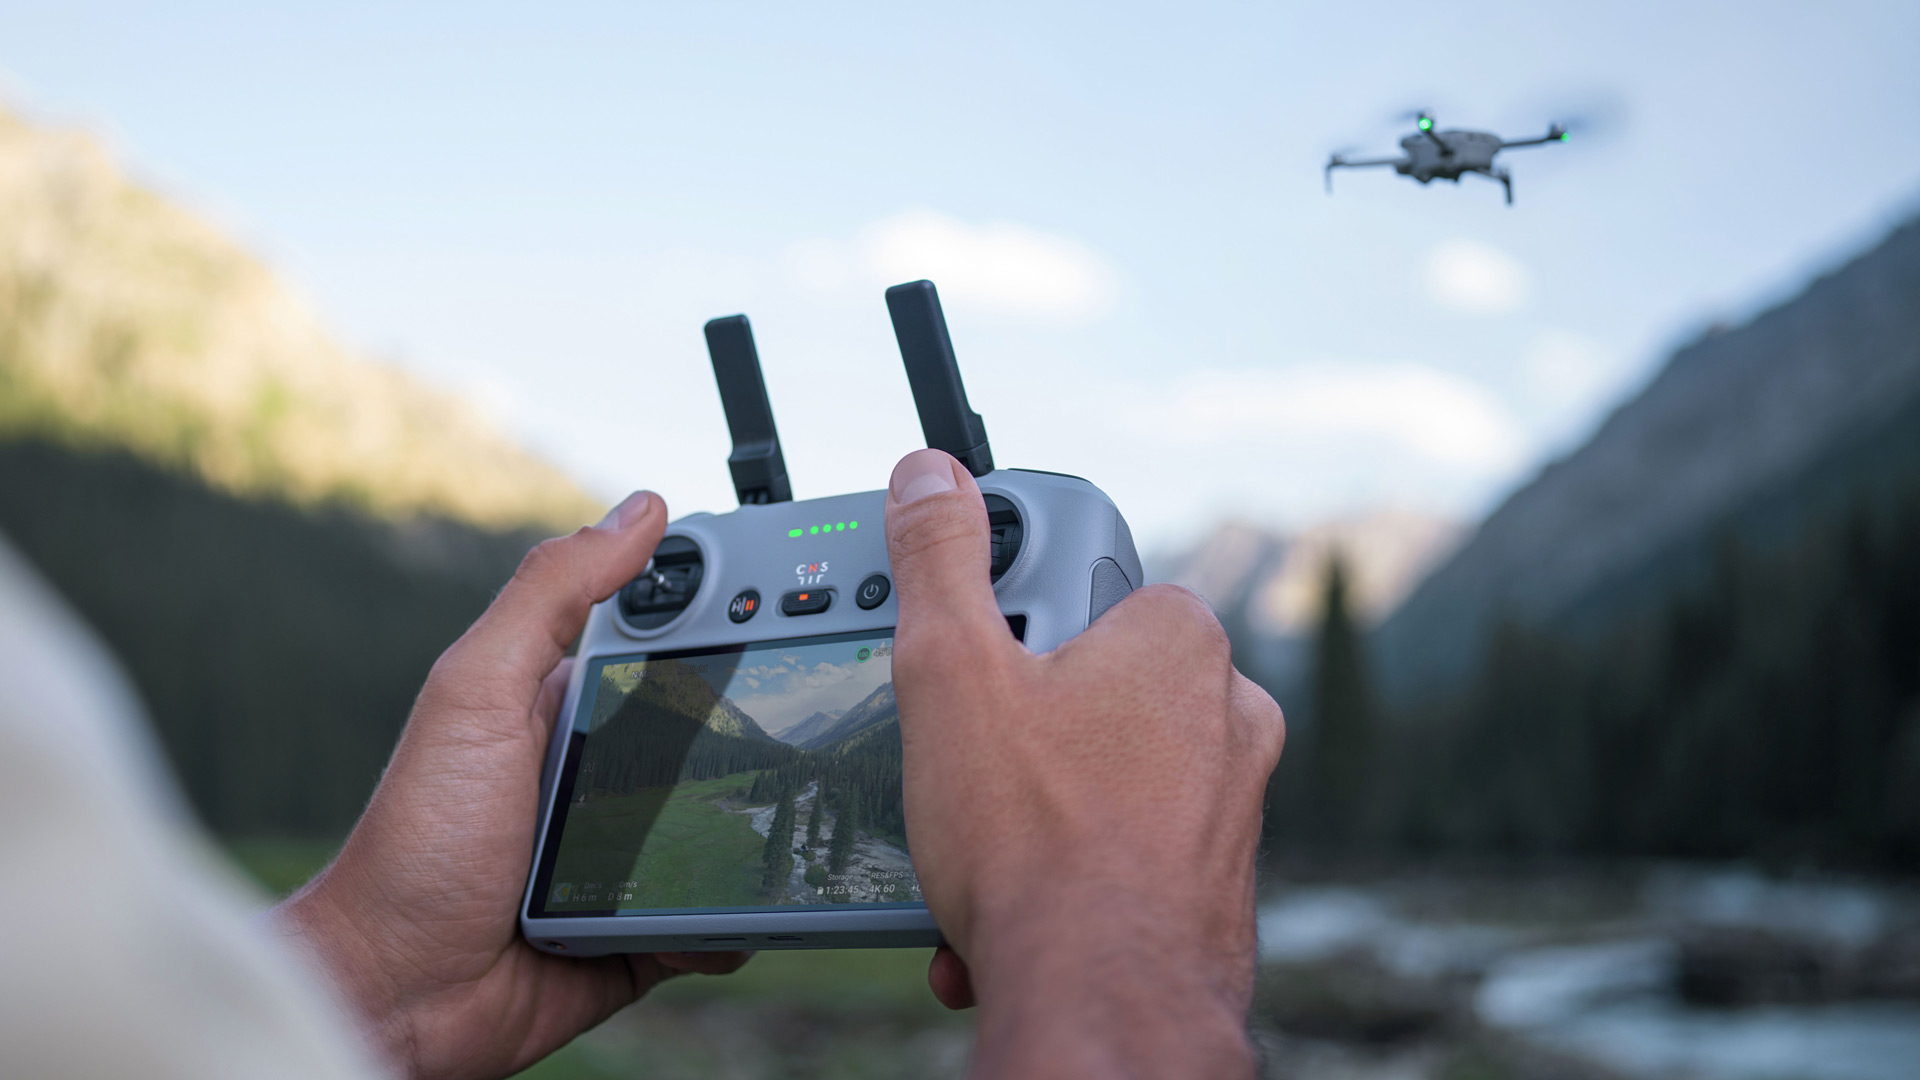 DJI Releases the Mini 4 Pro with Omnidirectional Vision, Longer Range